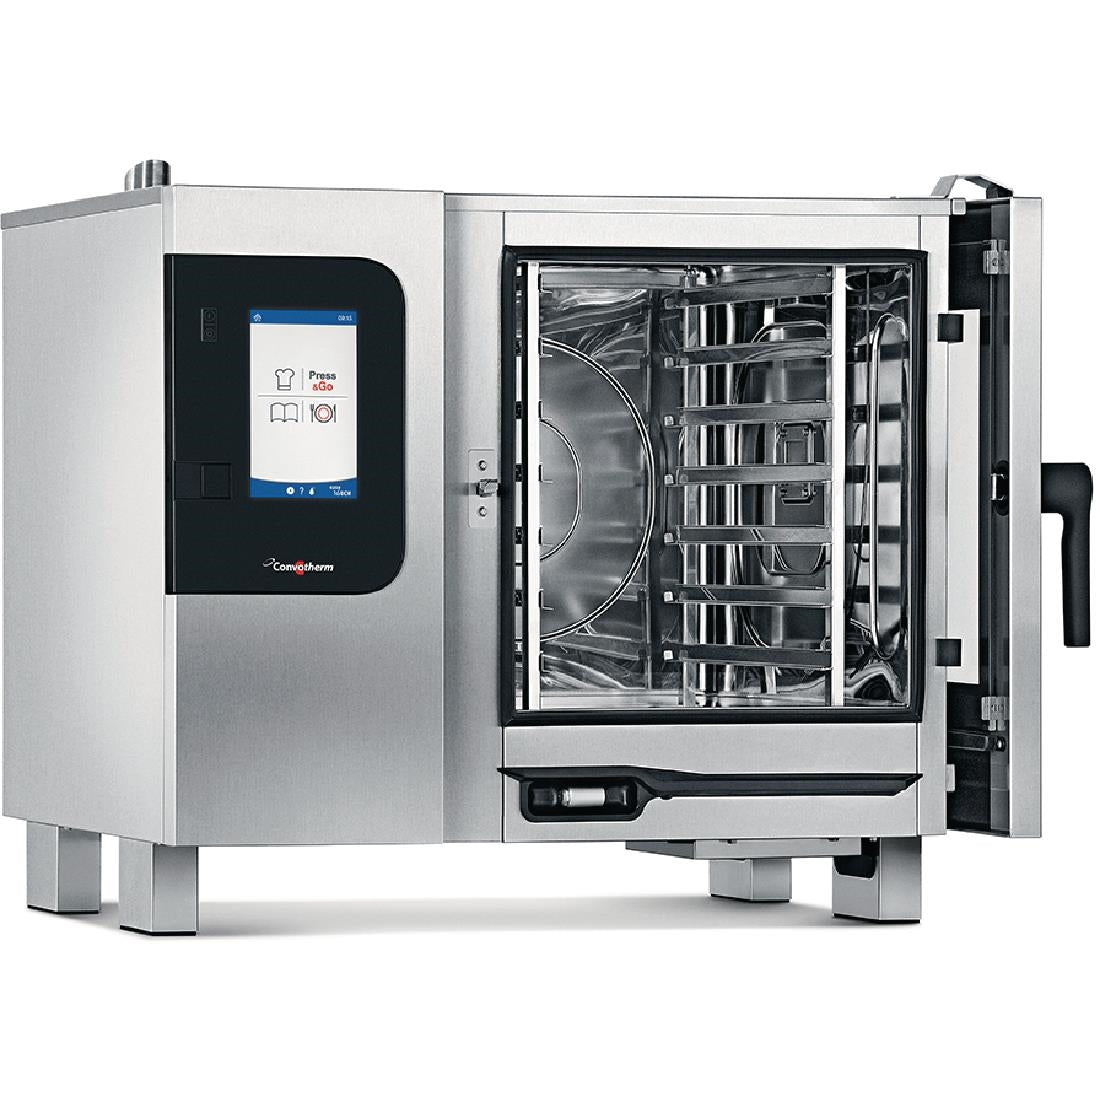 HC254-MO Convotherm 4 easyTouch Combi Oven 6 x 1 x1 GN Grid JD Catering Equipment Solutions Ltd